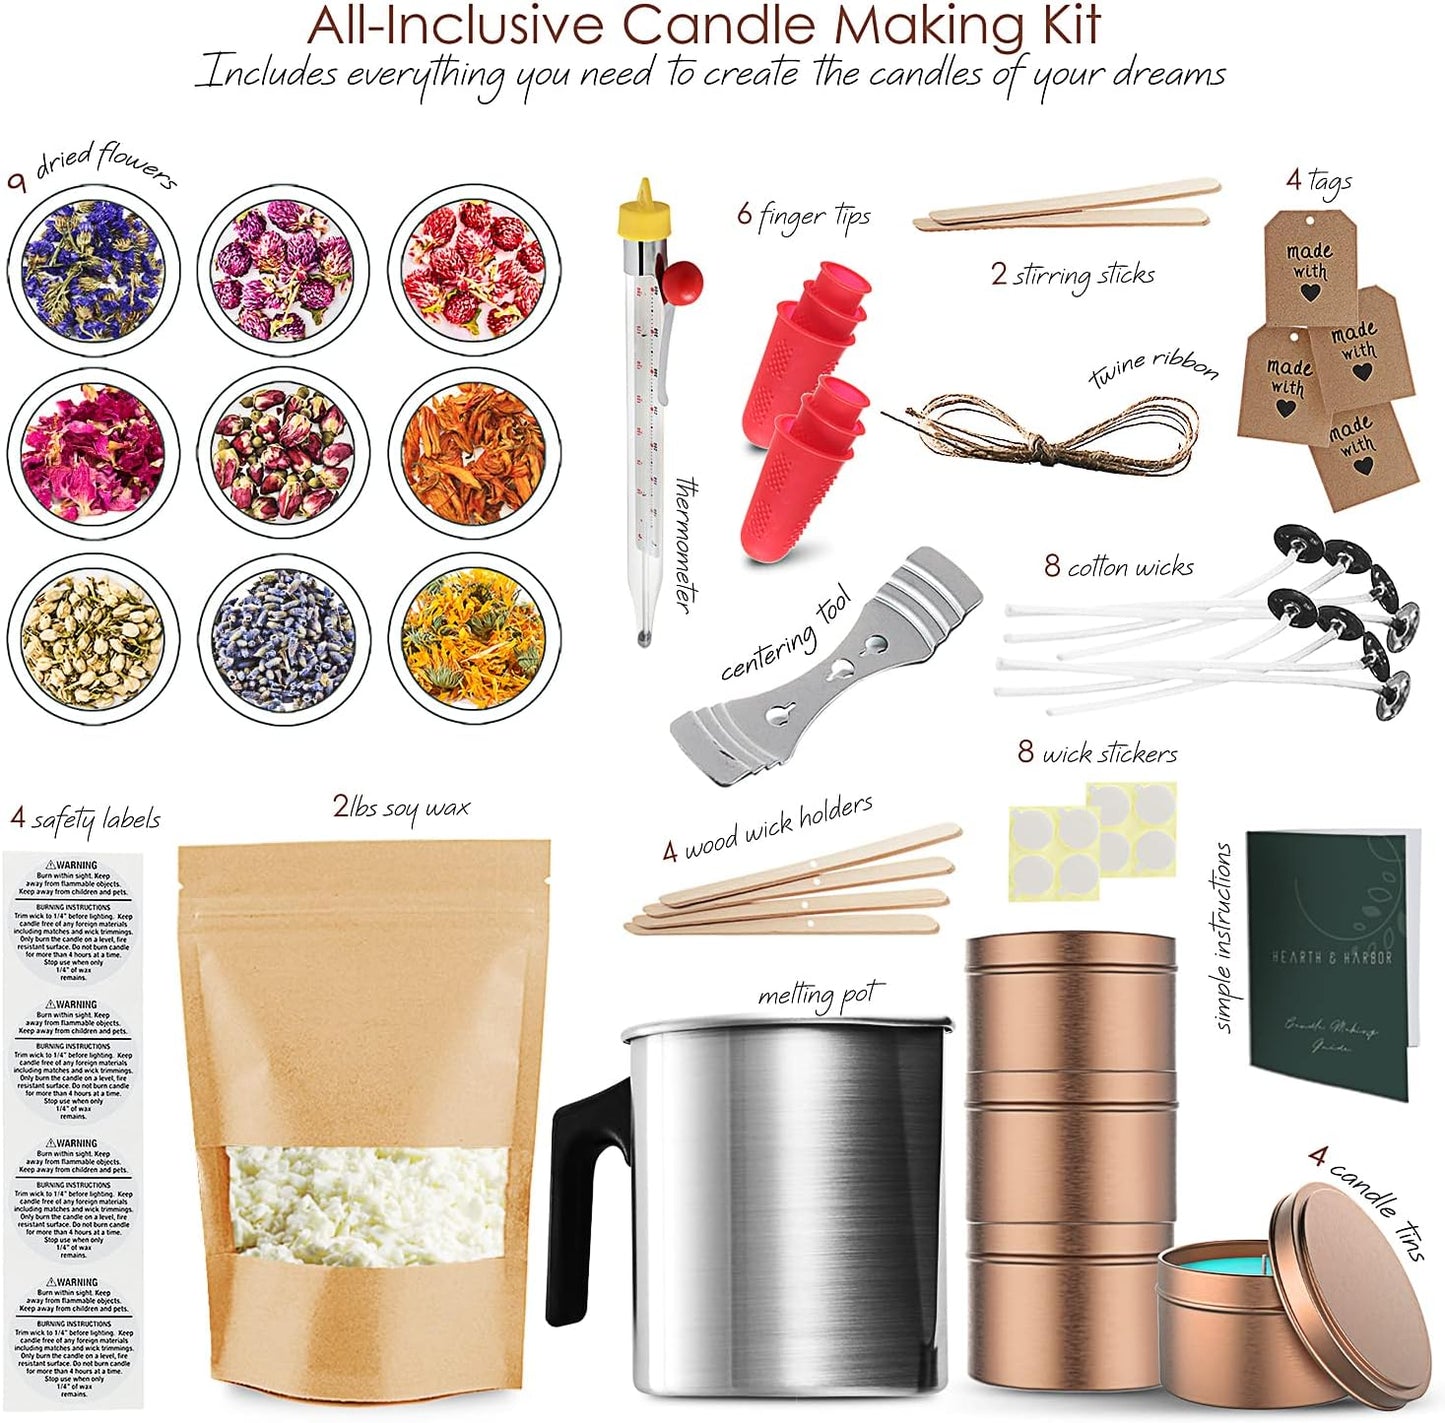 Soy Candle Making Kit + Dried Flowers - 2 Lbs